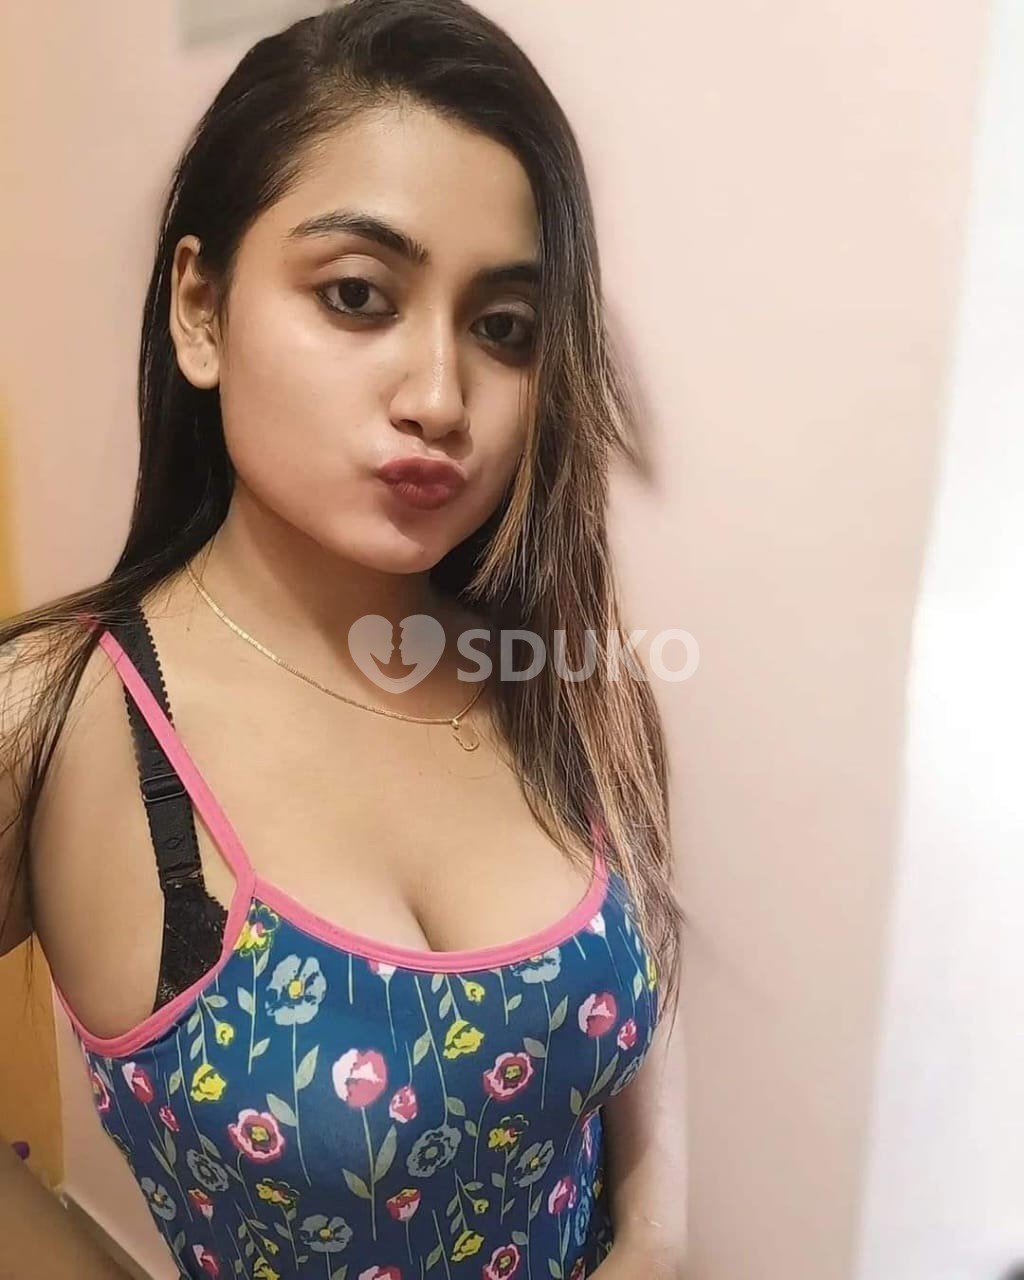 Mumbai Low price high profile college girl and aunty available any time available service genuine vip call girl ✅✅